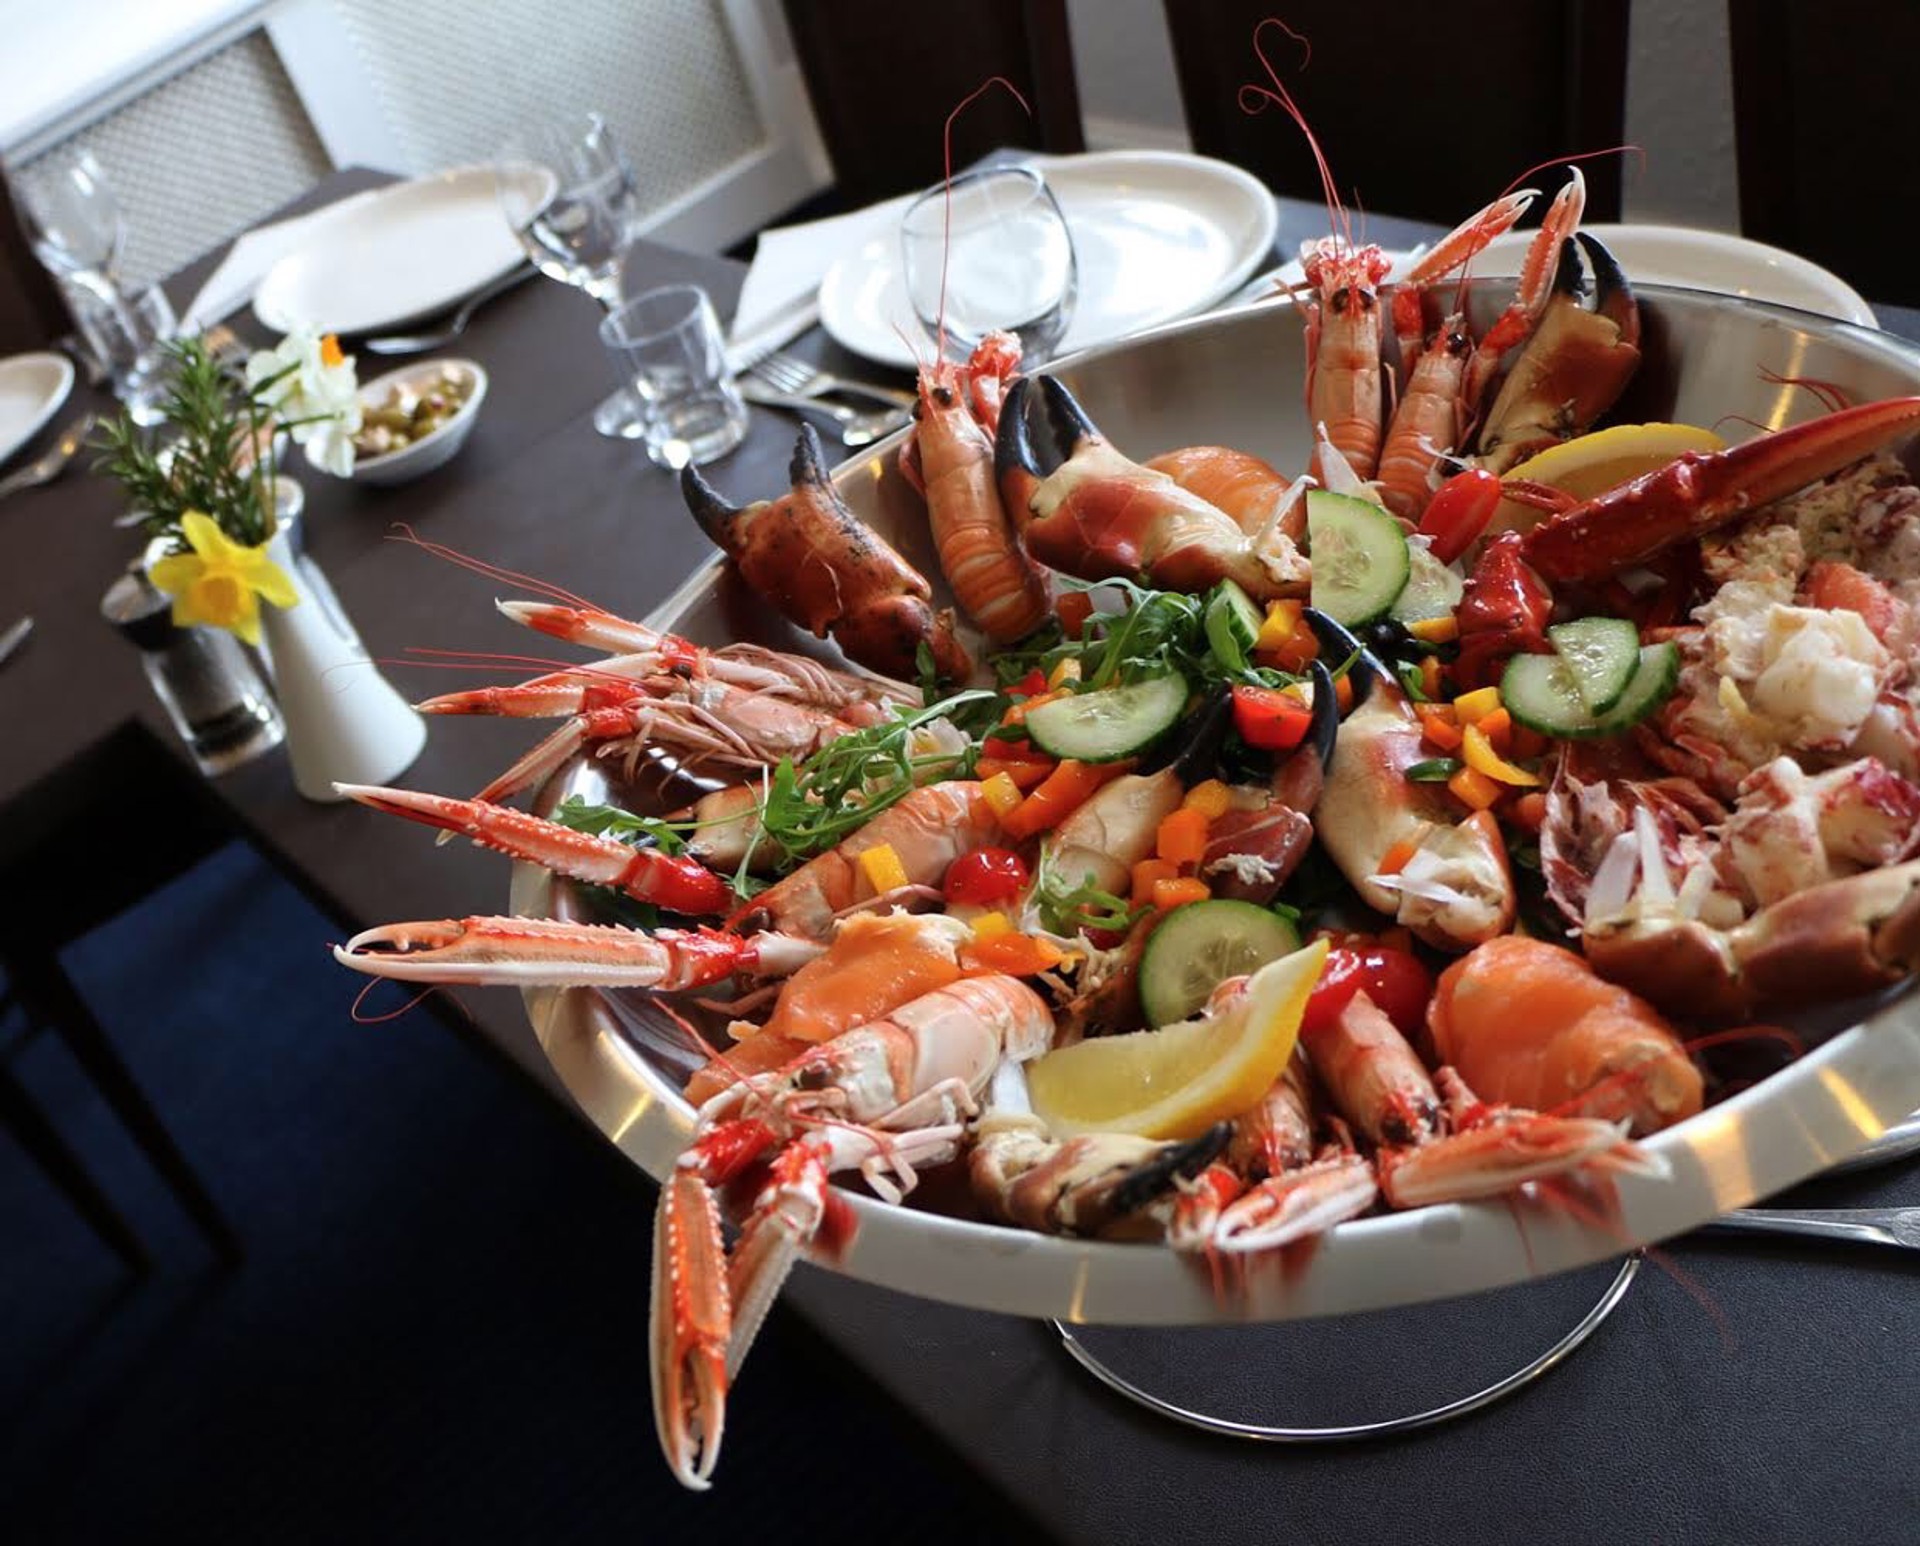 Background image - COLL HOTEL SEAFOOD PLATTER